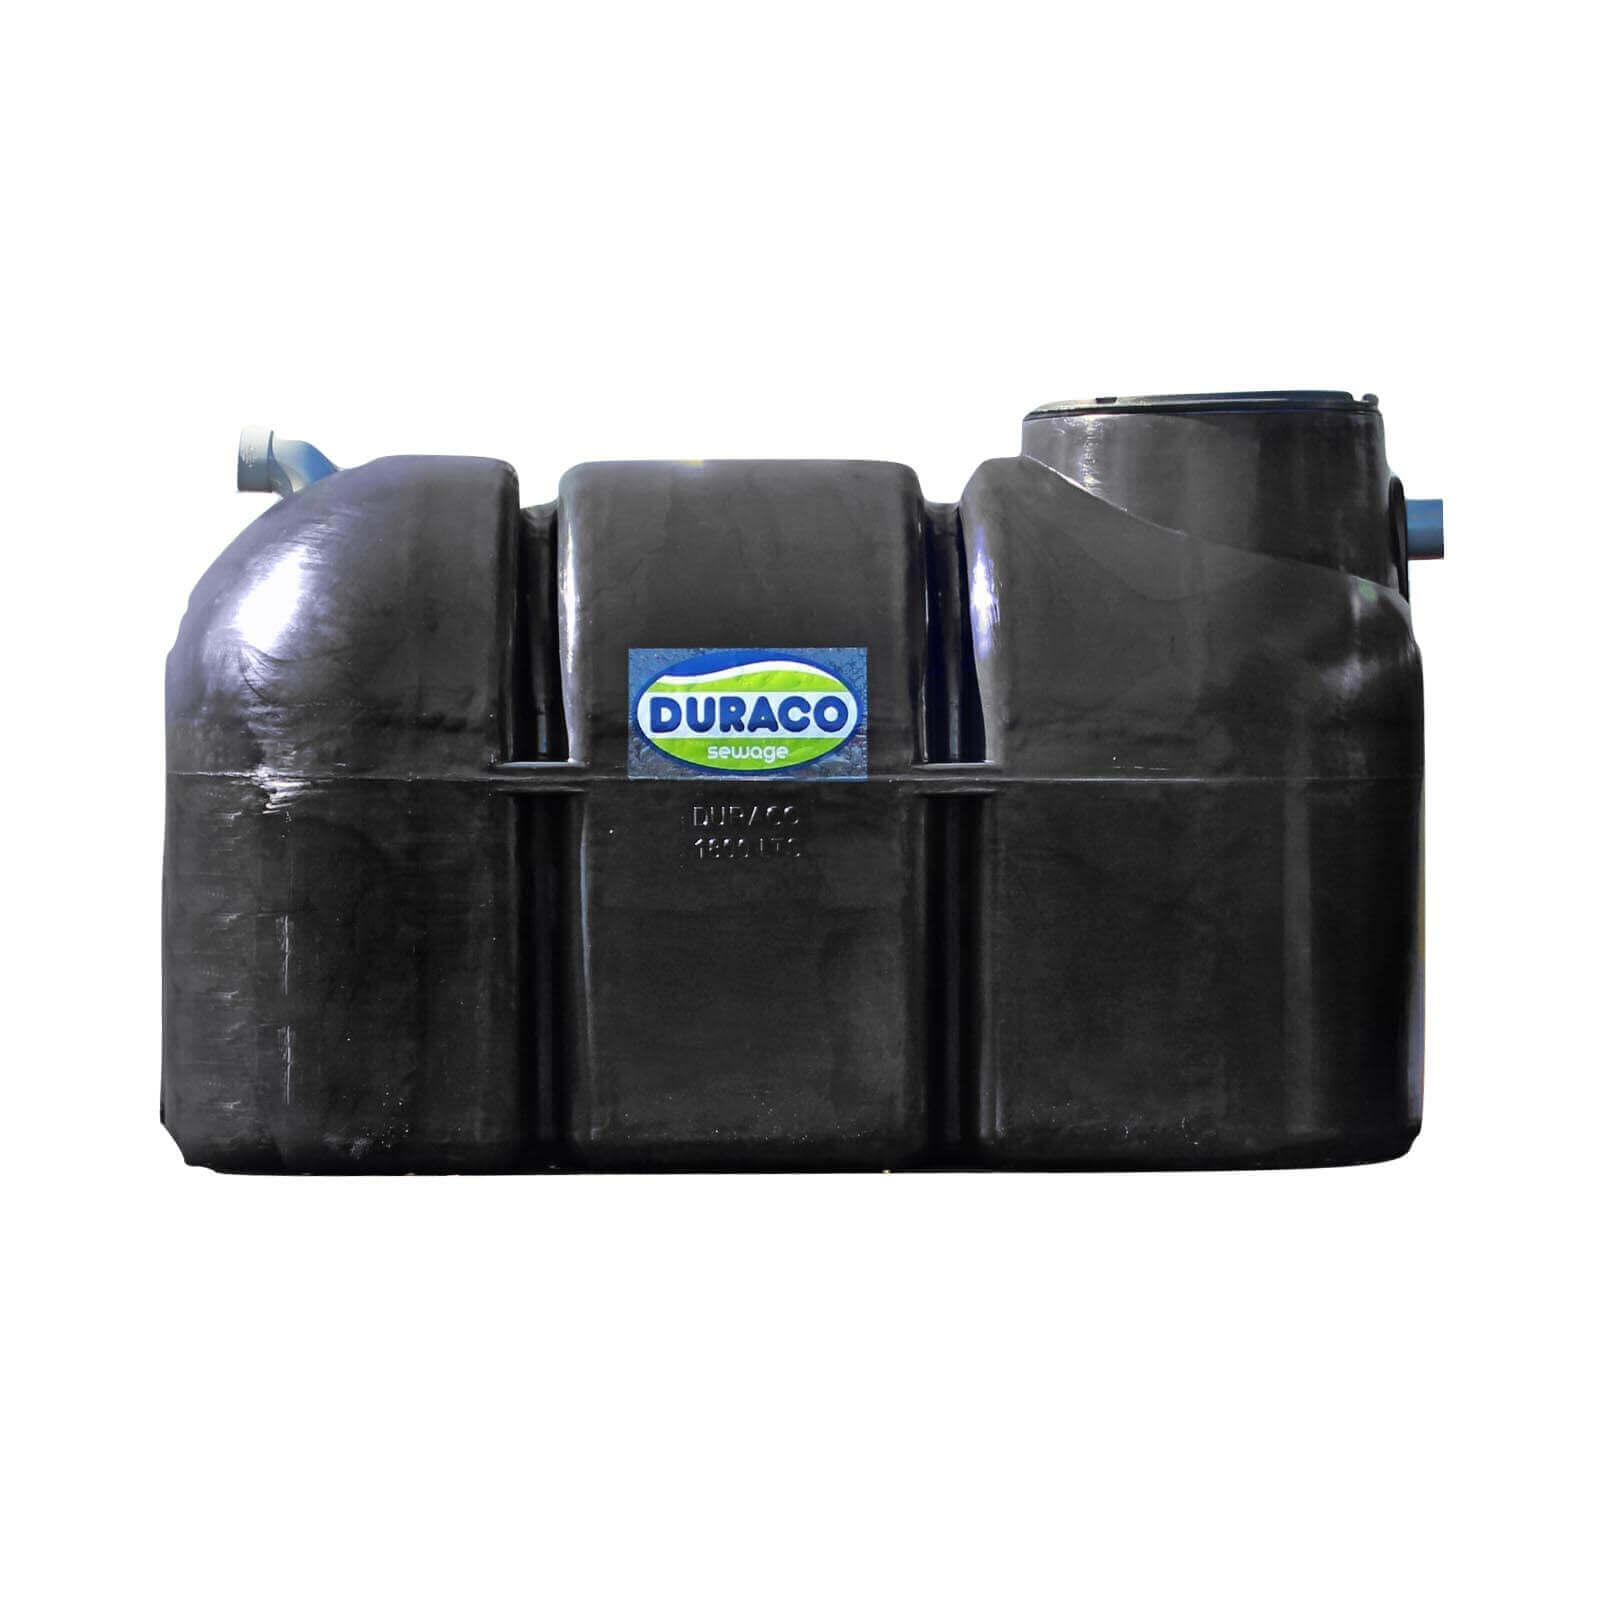 Septic tanks size and price